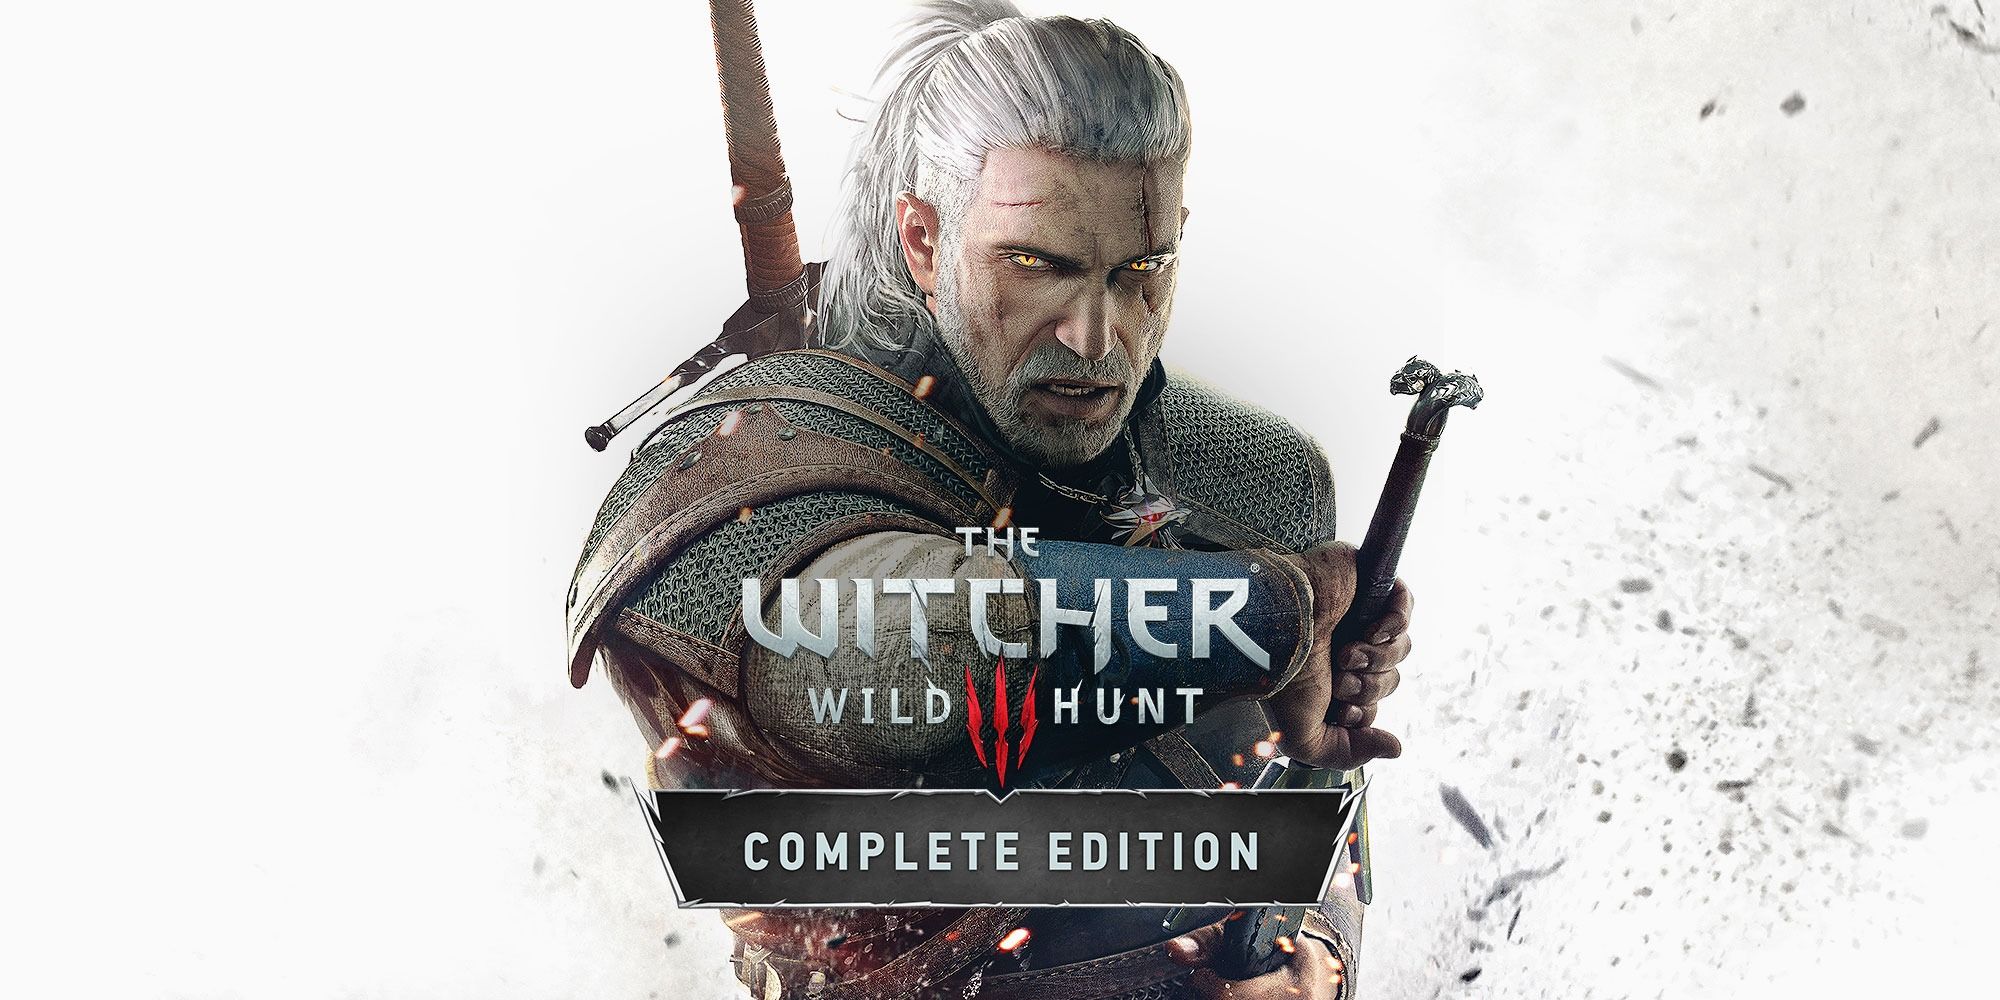 Geralt stands with his hand on his sword ready to unsheathe it, with The Witcher 3 title art in the foreground